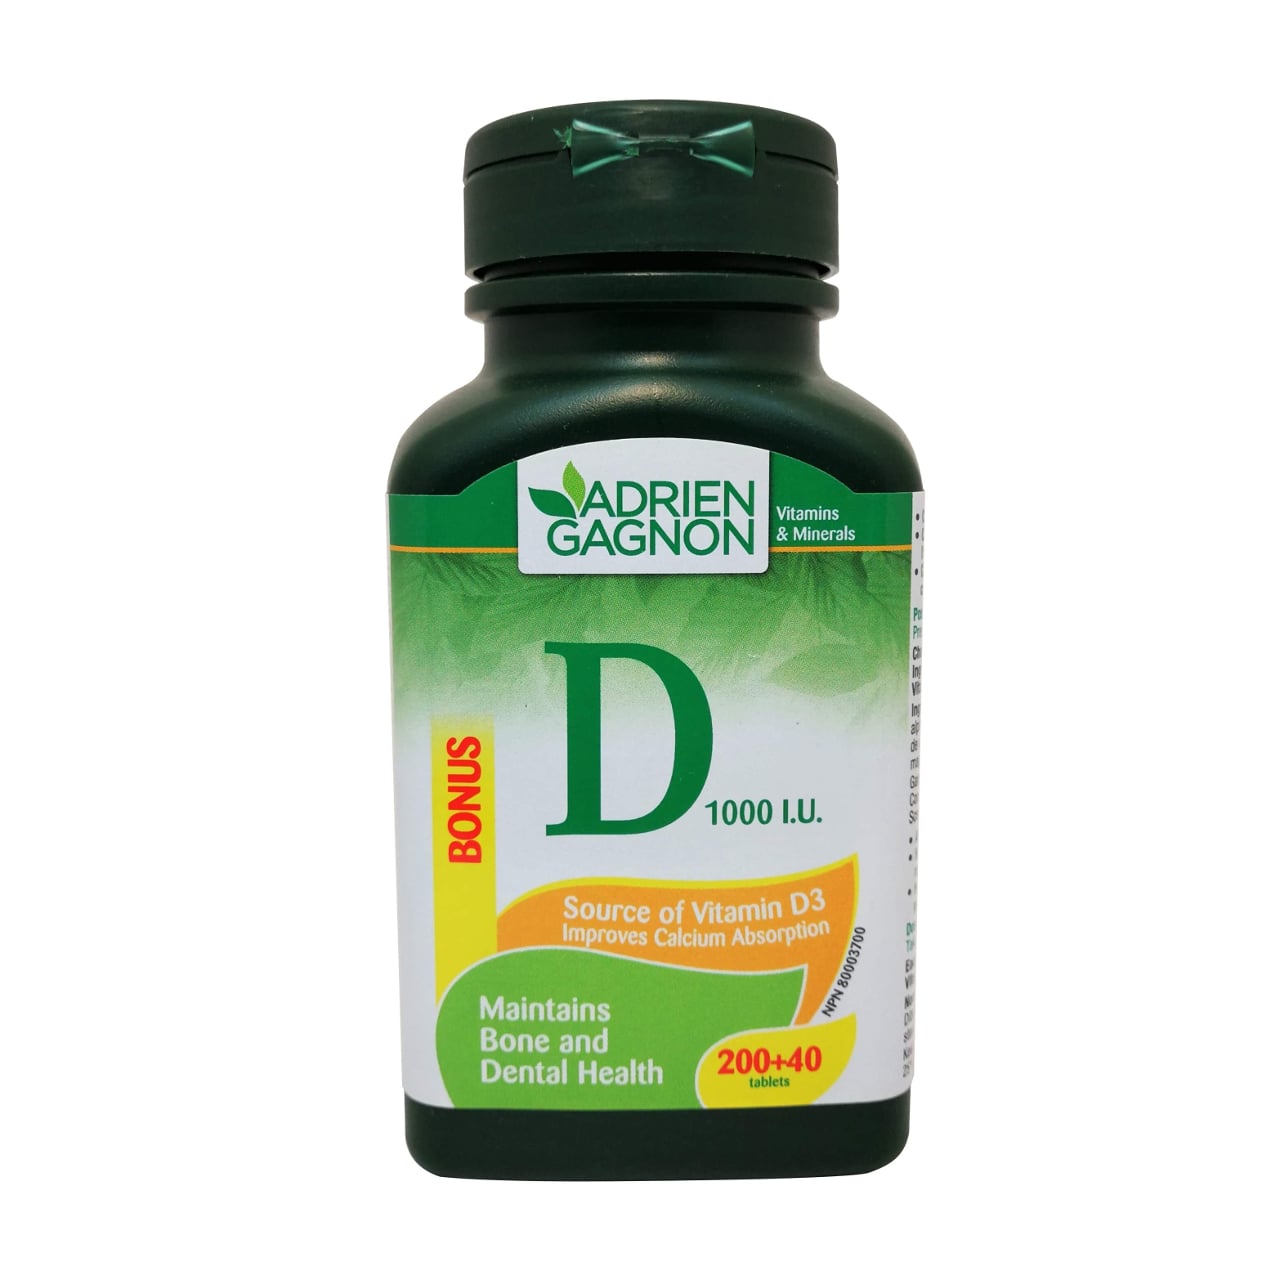 English product label for Adrien Gagnon Vitamin D 1000 IU tablets